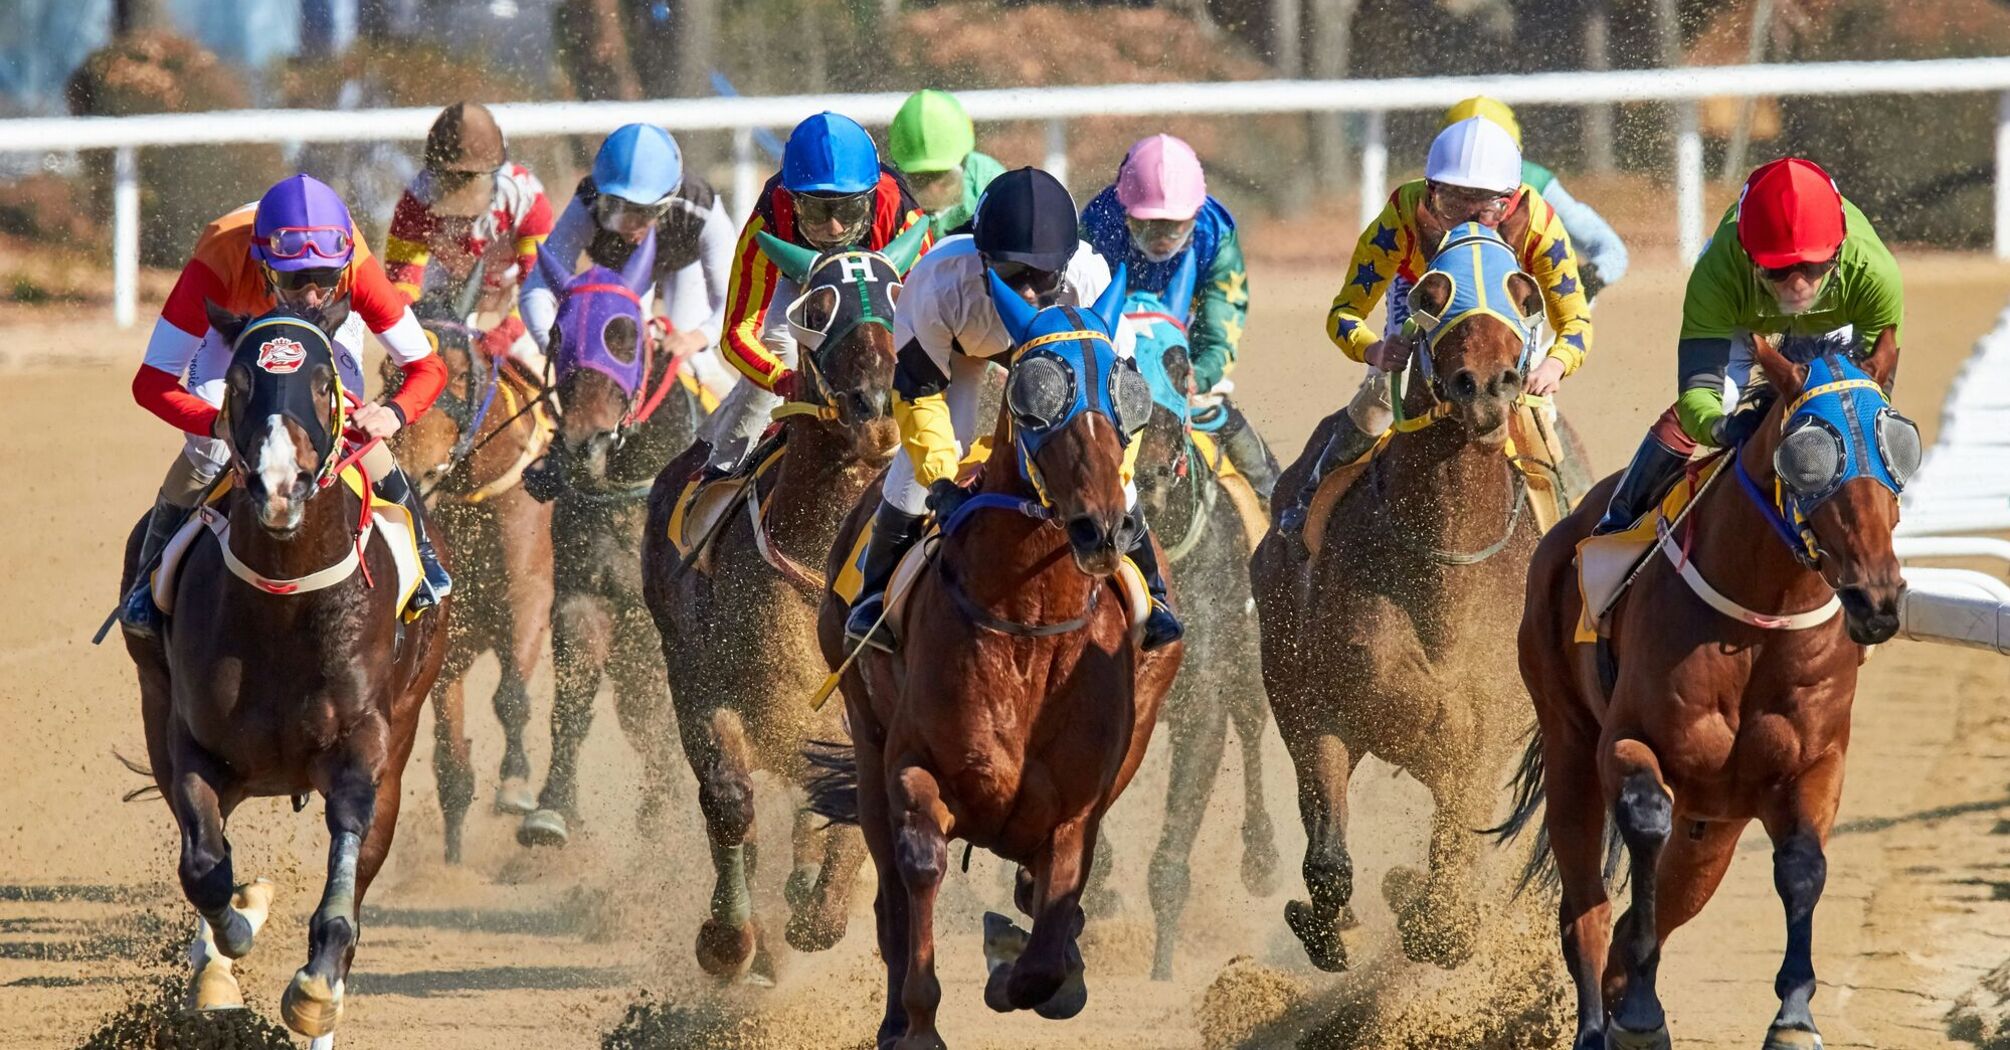 A group of jockeys on horseback racing competitively on a dirt track, kicking up dust in their wake